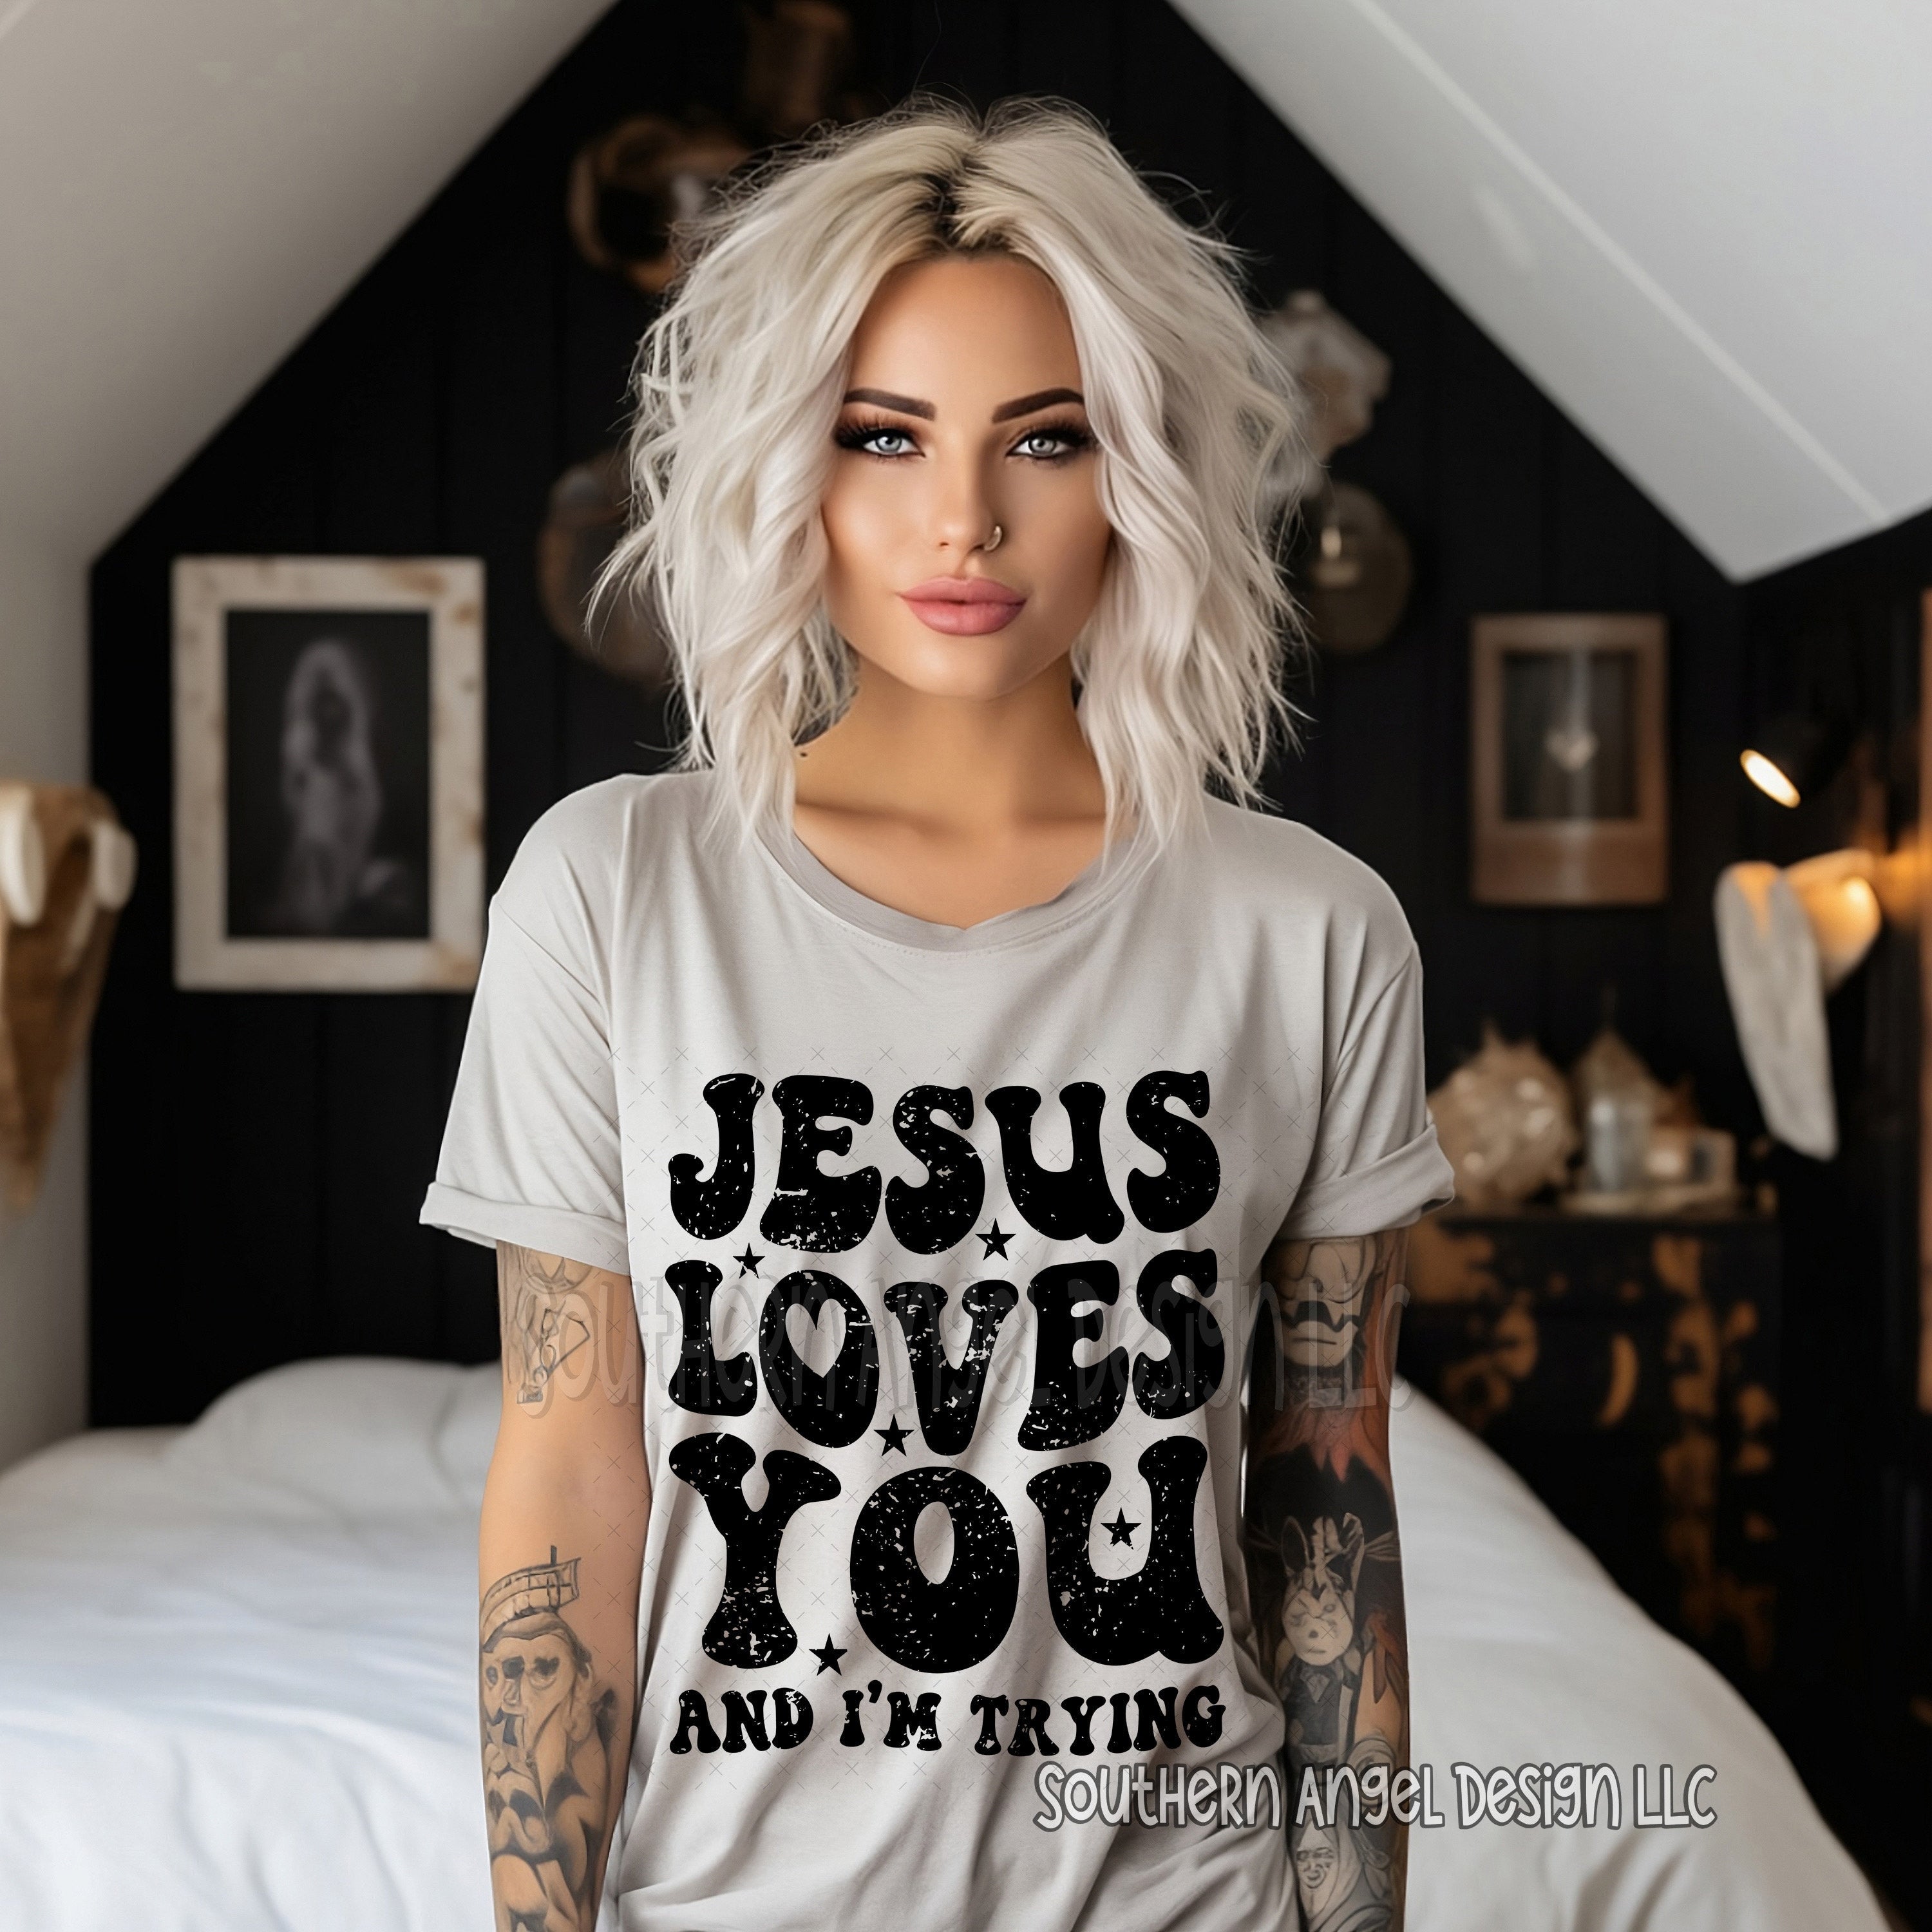 Jesus Loves You And I’m Trying shirt, Funny shirt, sarcastic shirt, Religious shirt, Leave the judging to Jesus, Love like Jesus